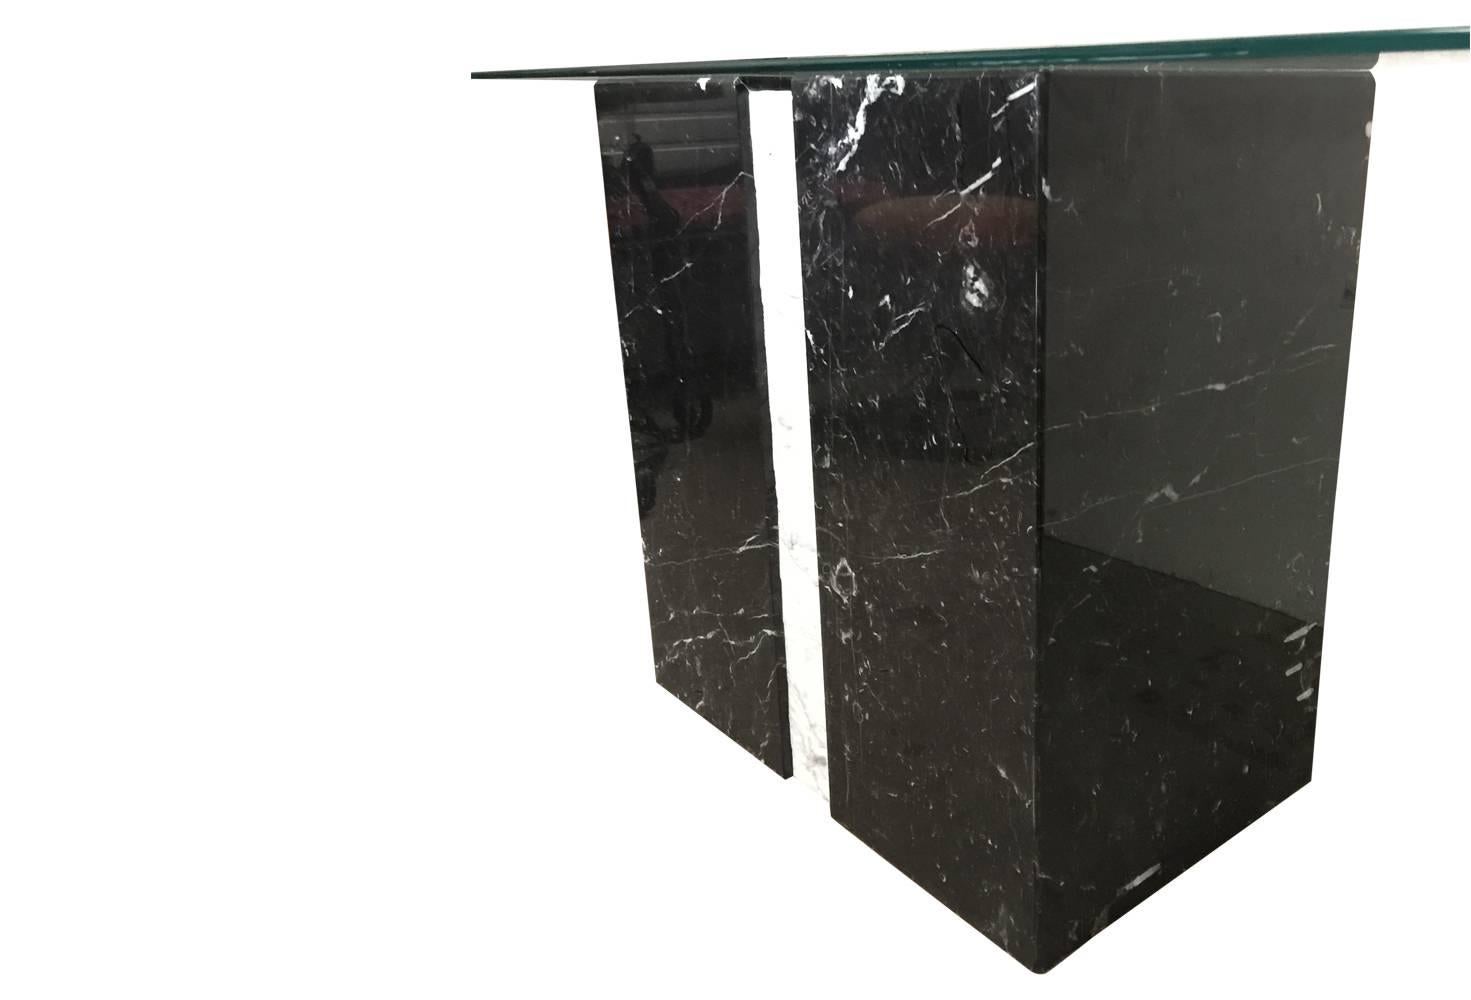 This is an awesome table! Base is composed of a stripe of white raw marble nestled between two blocks of polished black marble with white veining. Glass top is beveled and heavy. Awesome piece of postmodern / Hollywood Regency design. 

Measures: